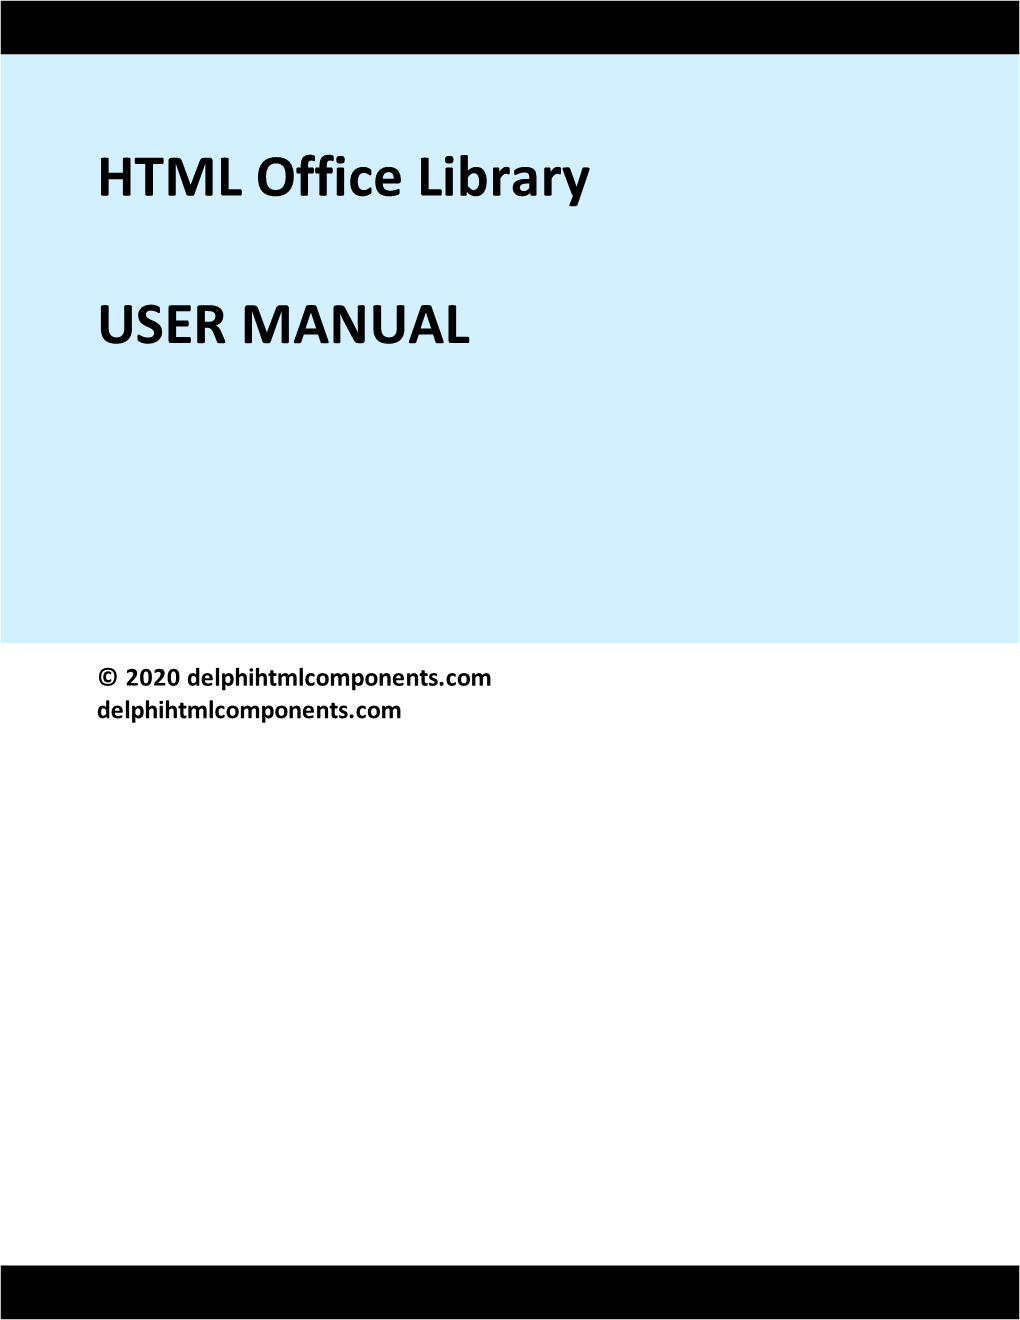 HTML Office Library